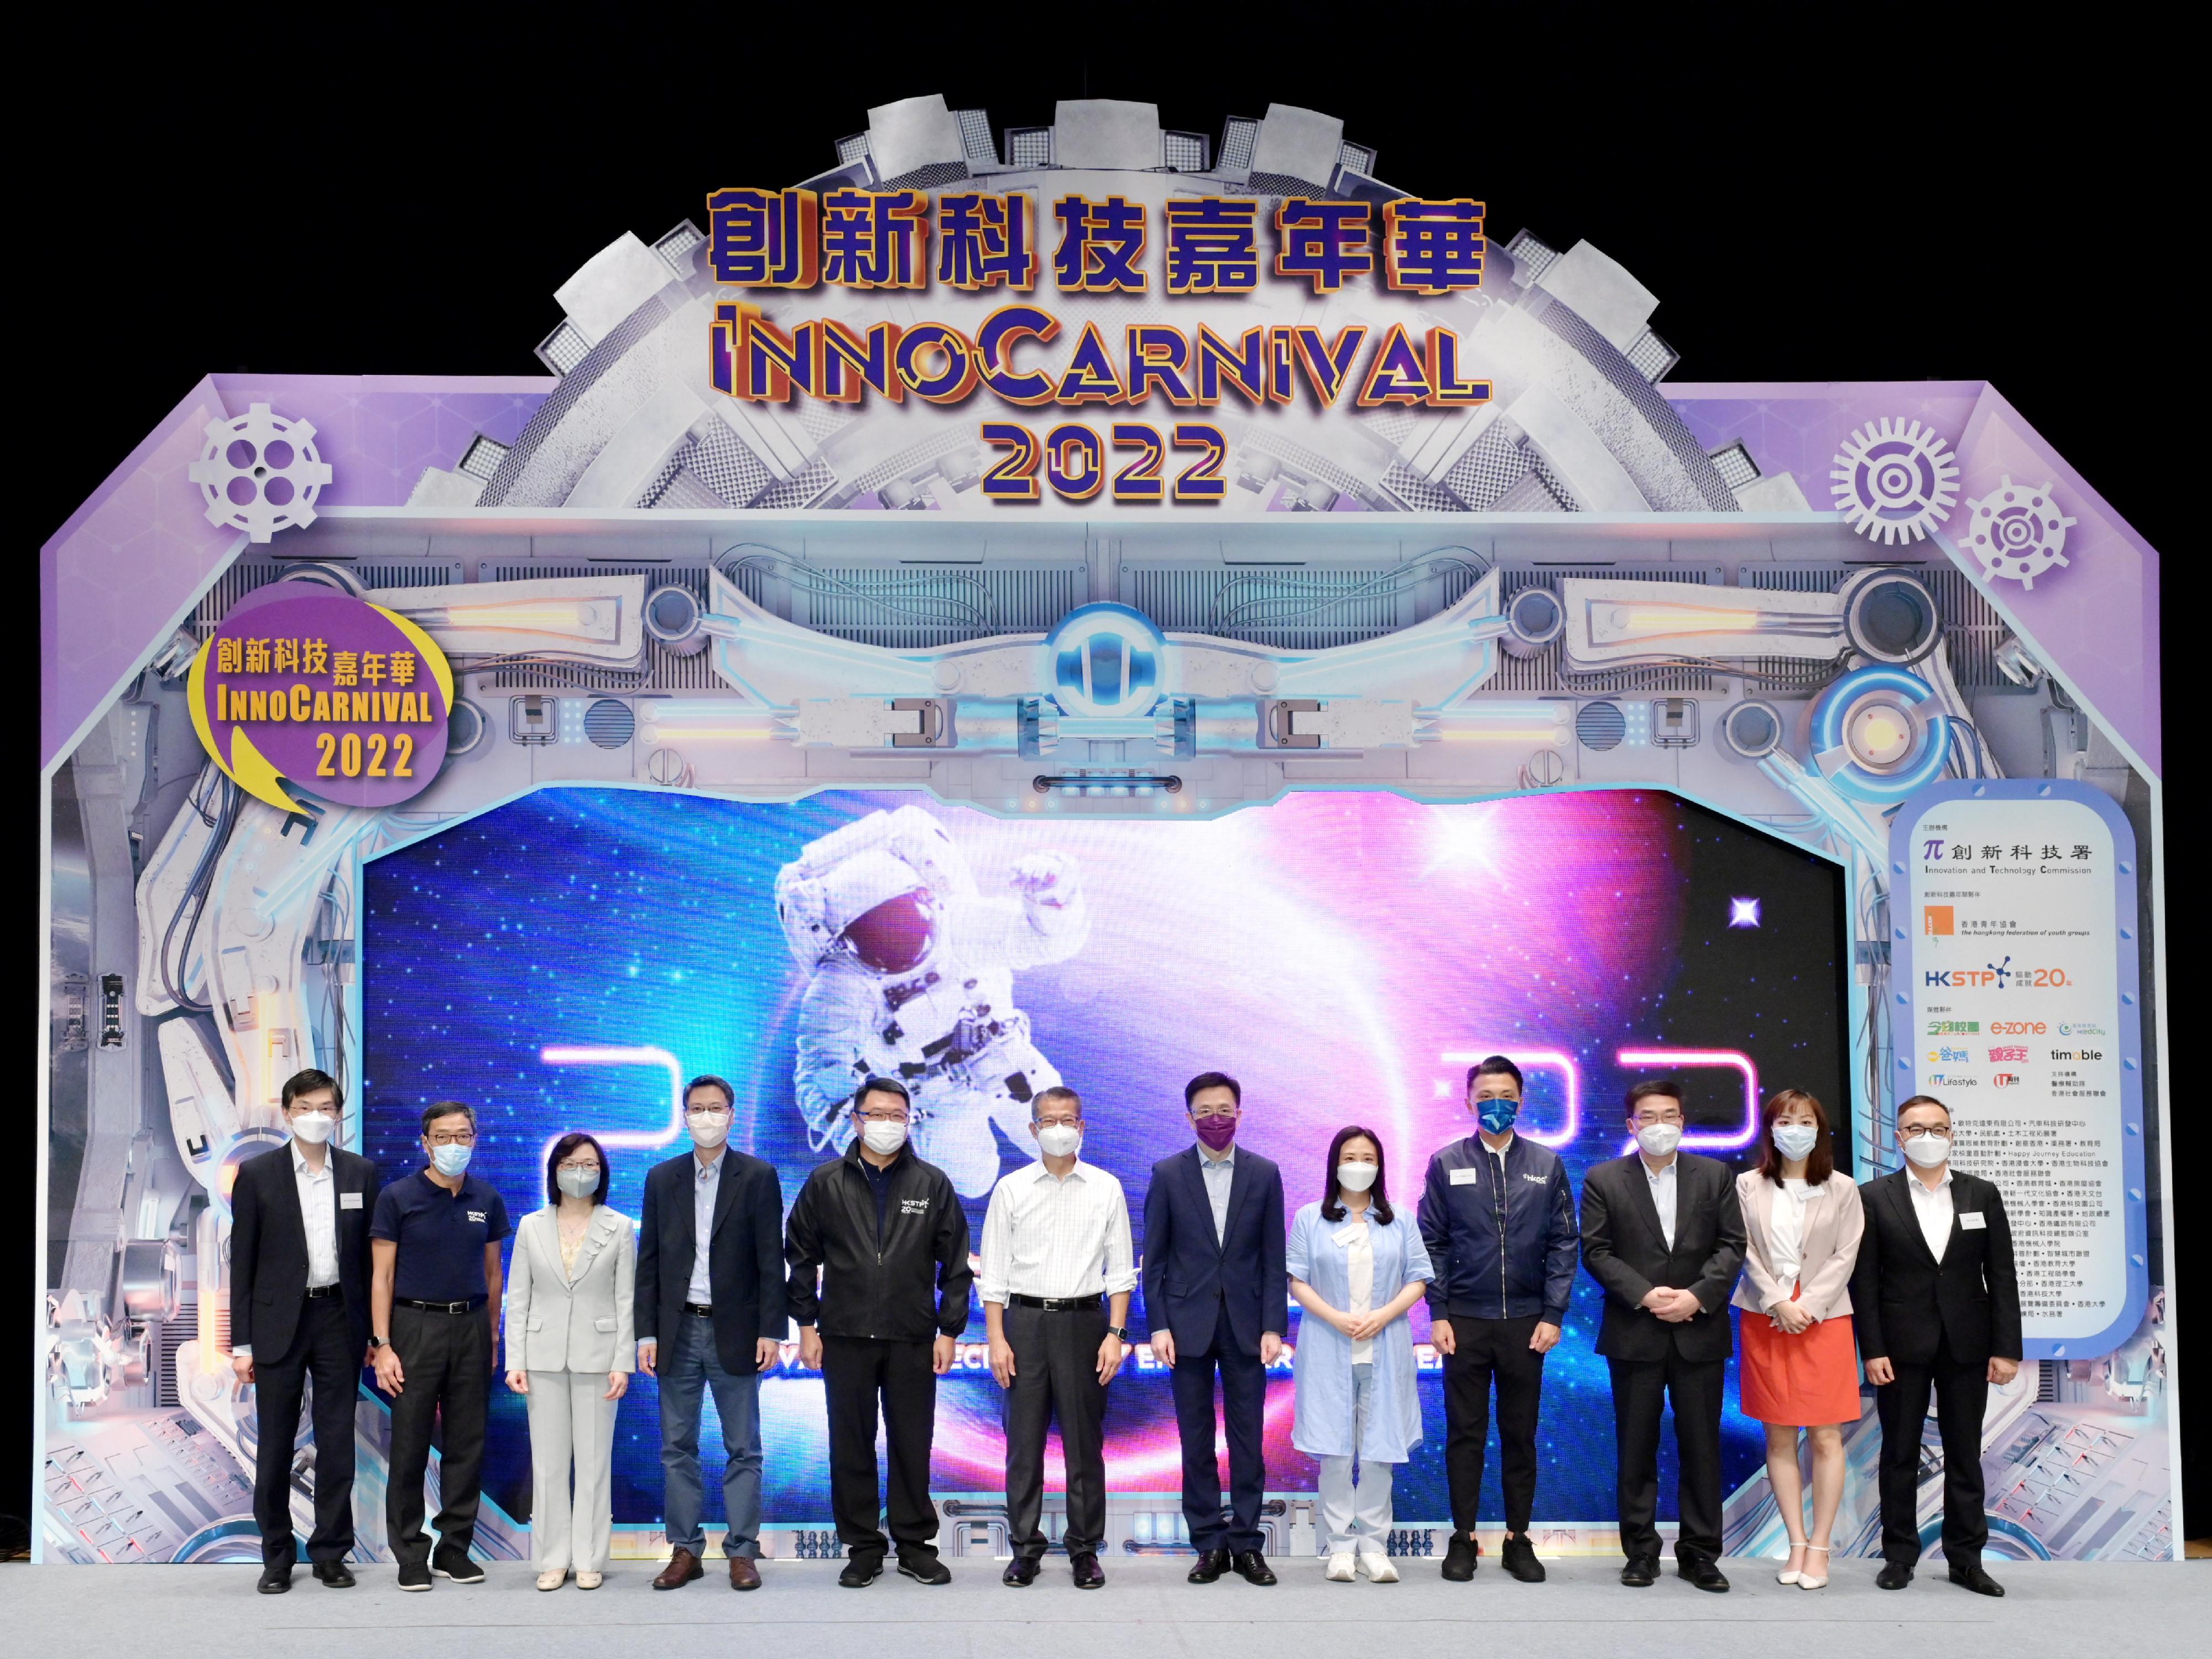 The Financial Secretary, Mr Paul Chan, attended the opening ceremony of InnoCarnival 2022 today (October 22). Photo shows (from left) the Chief Executive of the Hong Kong Council of Social Service, Mr Chua Hoi-wai; the Chief Executive Officer of the Hong Kong Science and Technology Parks Corporation (HKSTP), Mr Albert Wong; the Commissioner for Innovation and Technology, Ms Rebecca Pun; the Permanent Secretary for Innovation, Technology and Industry, Mr Eddie Mak; the Chairman of the Board of Directors of the HKSTP, Dr Sunny Chai; Mr Chan; the Secretary for Innovation, Technology and Industry, Professor Sun Dong; Legislative Council Members Ms Elizabeth Quat, Mr Sunny Tan and Dr Dennis Lam; the Under Secretary for Innovation, Technology and Industry, Ms Lillian Cheong; and the Executive Director of the Hong Kong Federation of Youth Groups, Mr Andy Ho, at the opening ceremony.